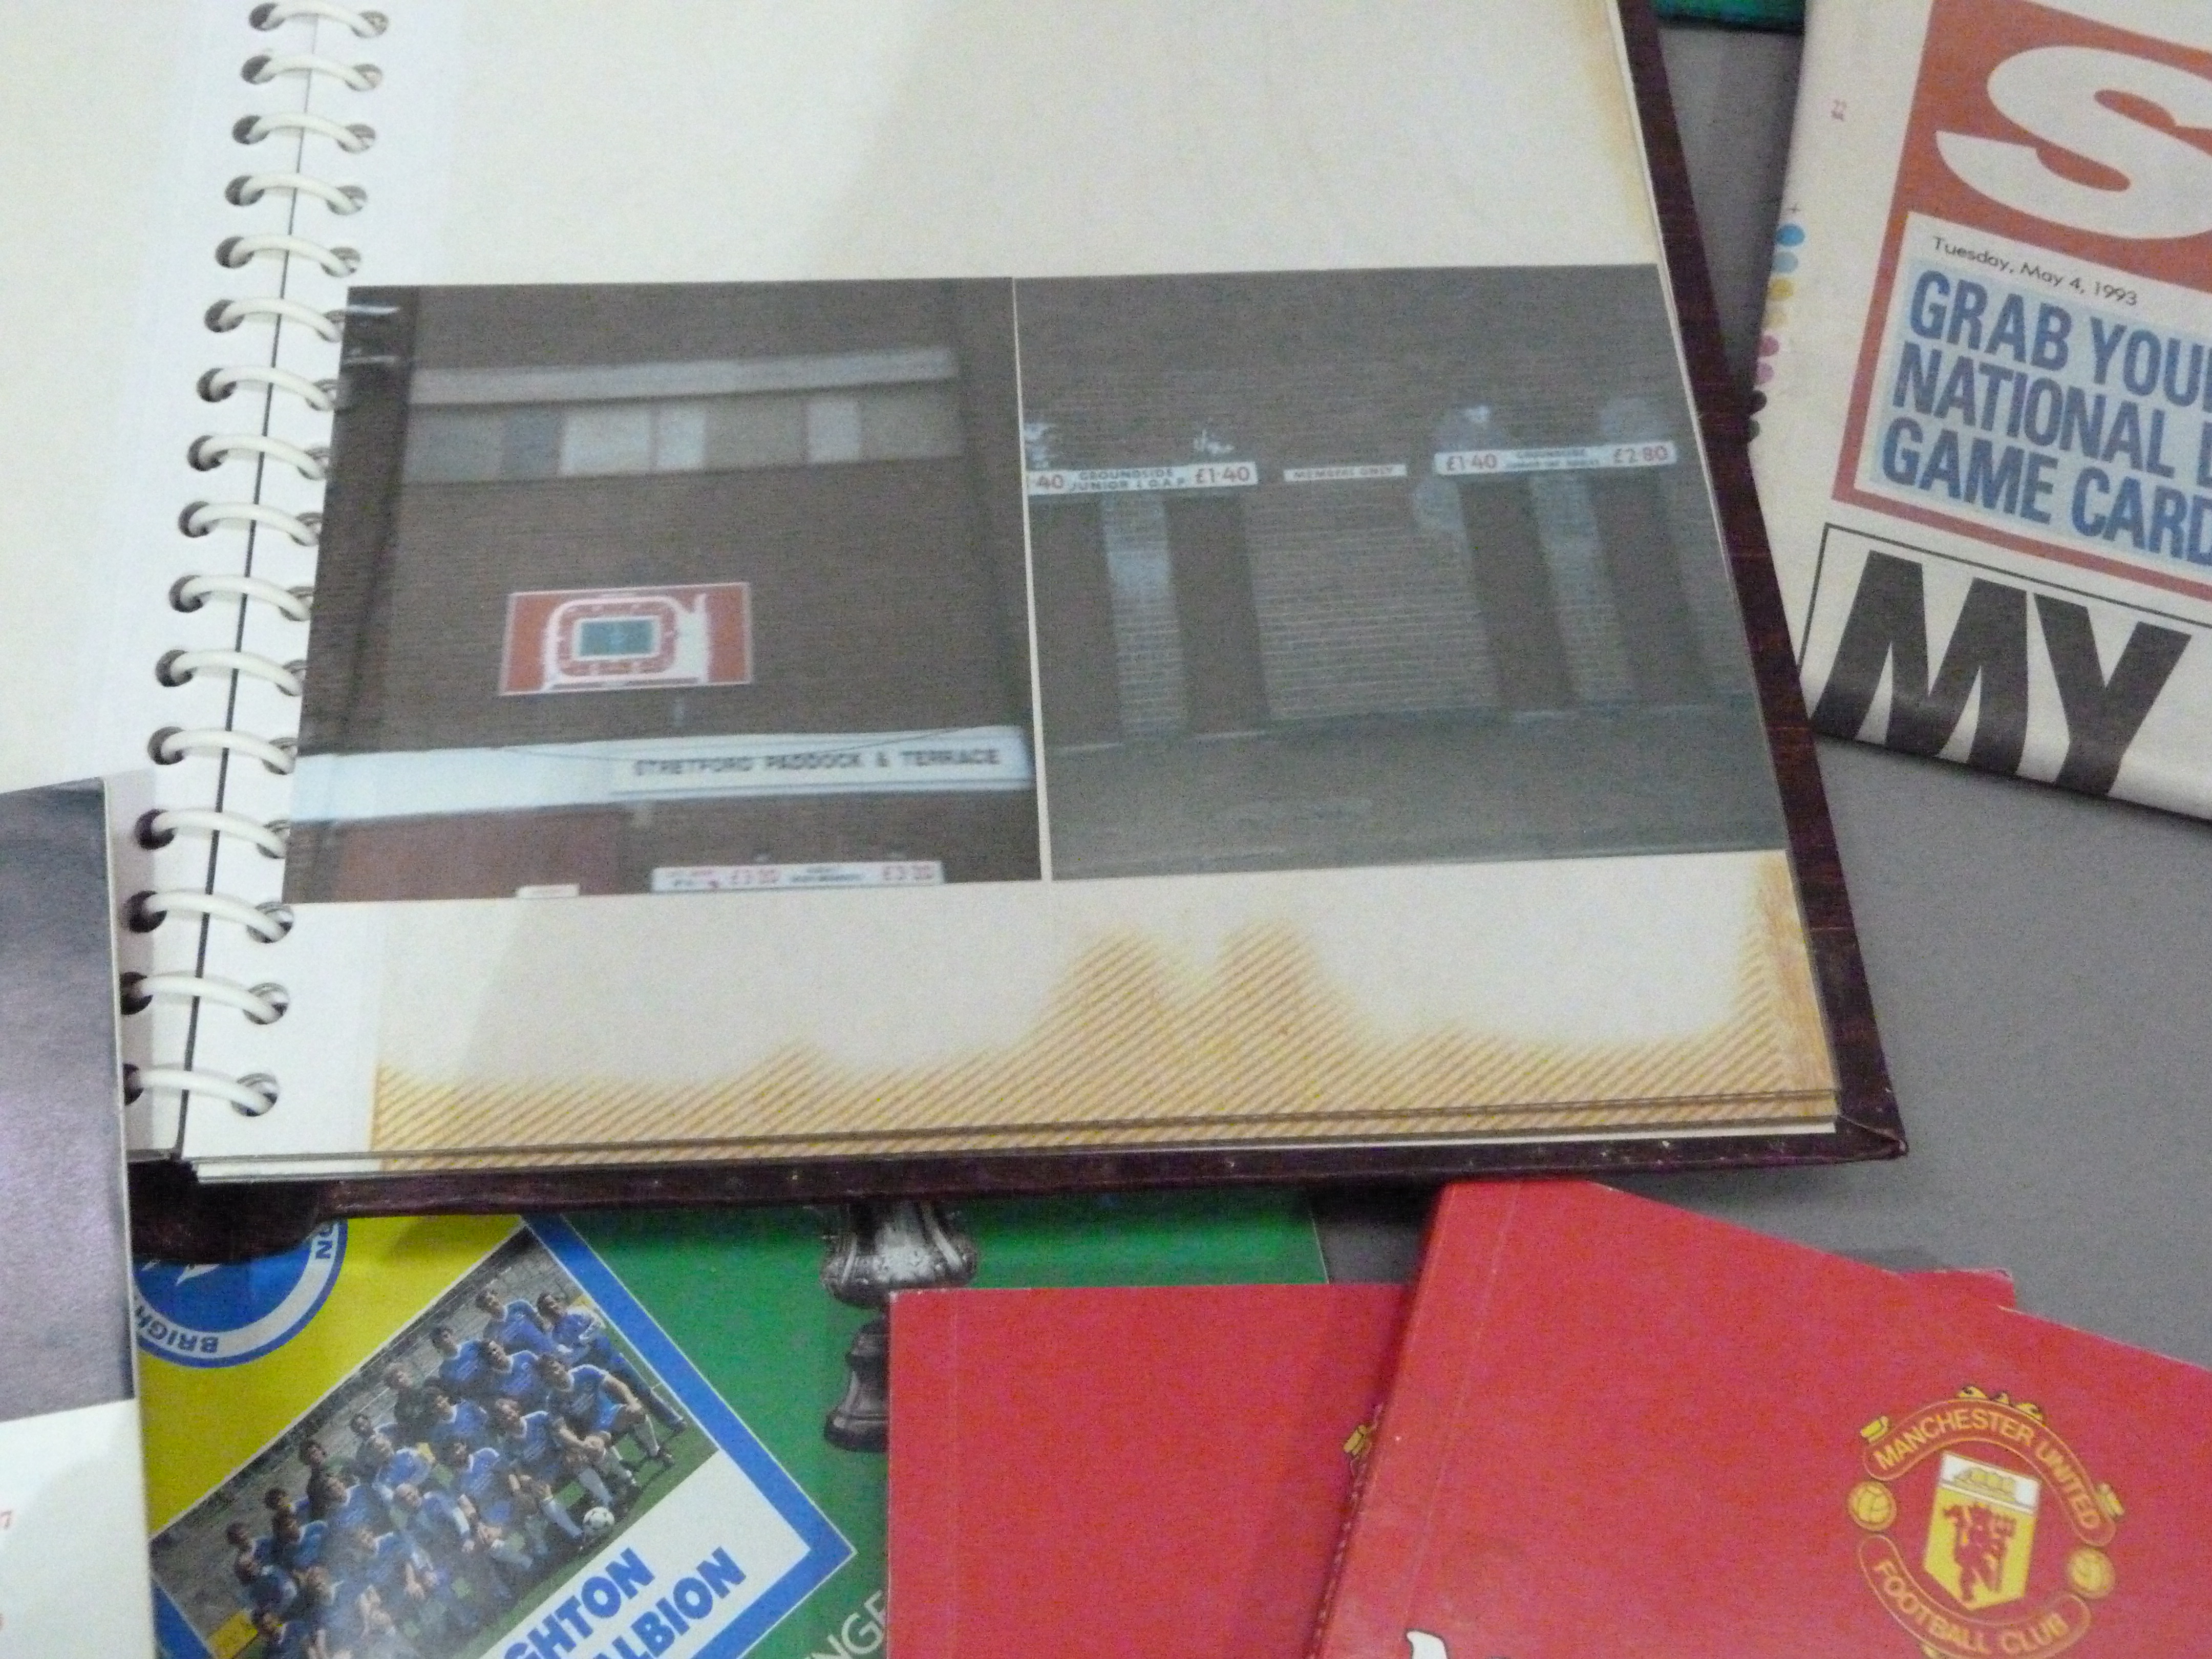 Manchester United Interest: Colour photographs and negatives of Old Trafford before the - Image 3 of 4